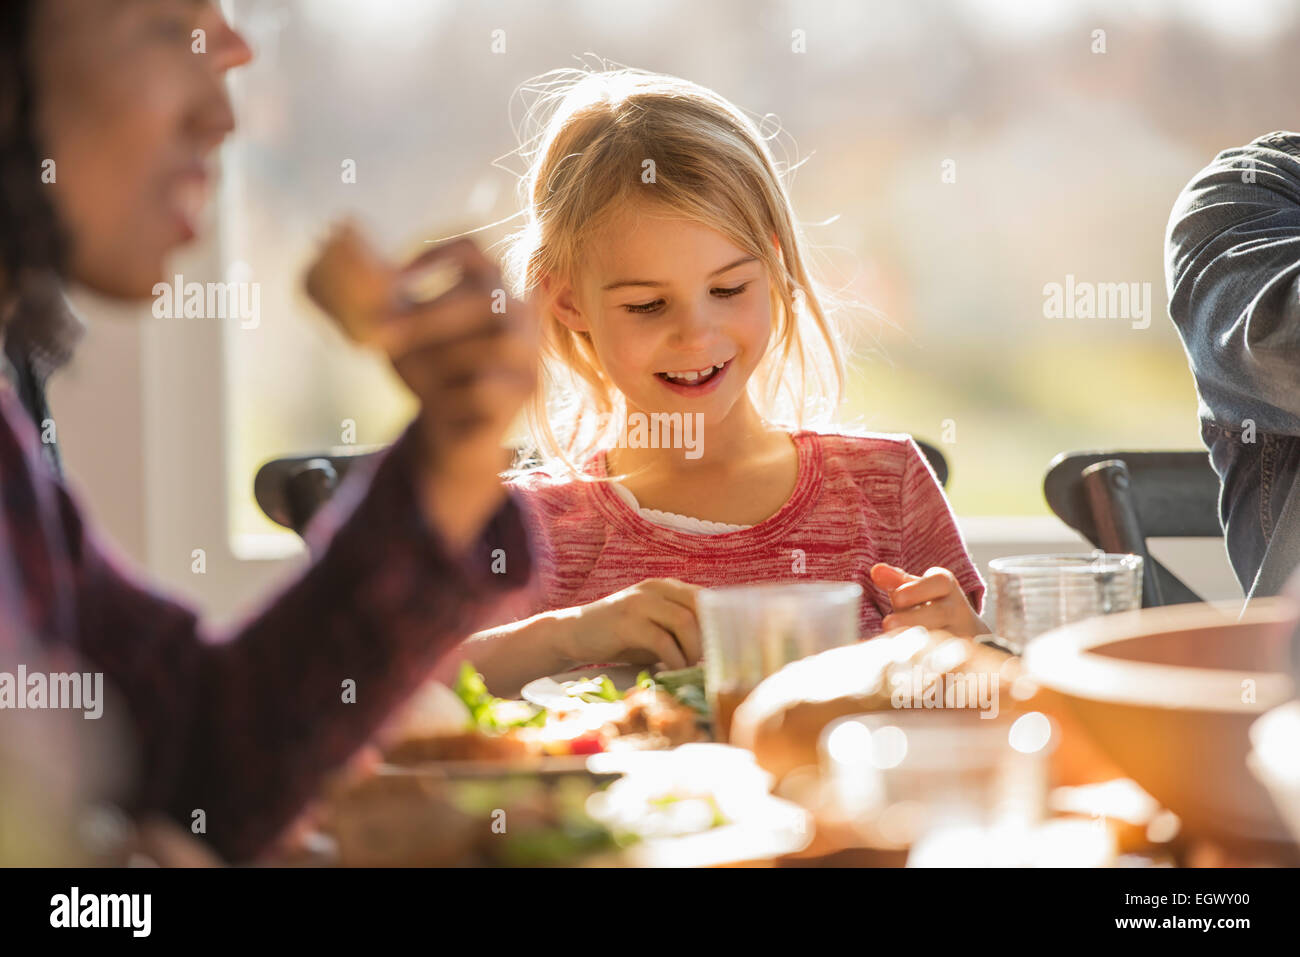 A group of people, adults and children, seated around a table for a meal. Stock Photo